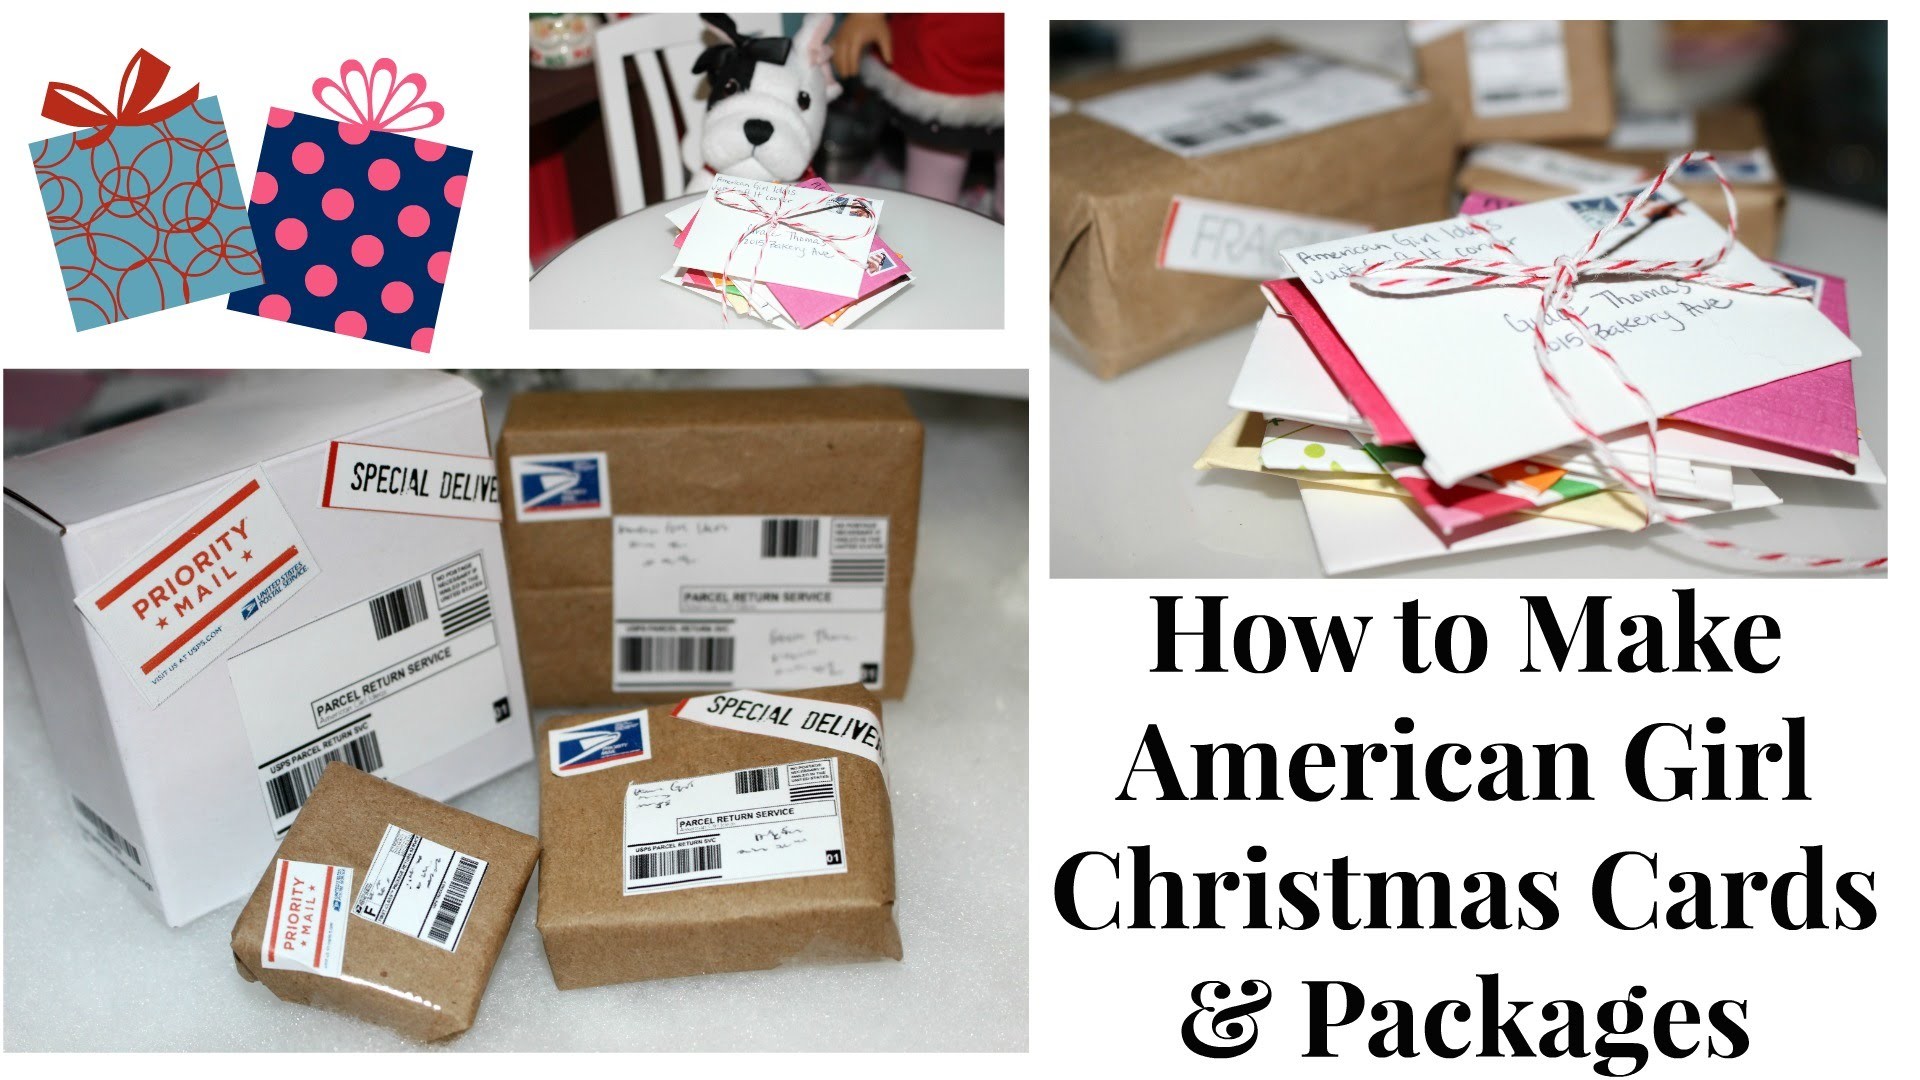 DIY American Girl Christmas Cards and Packages